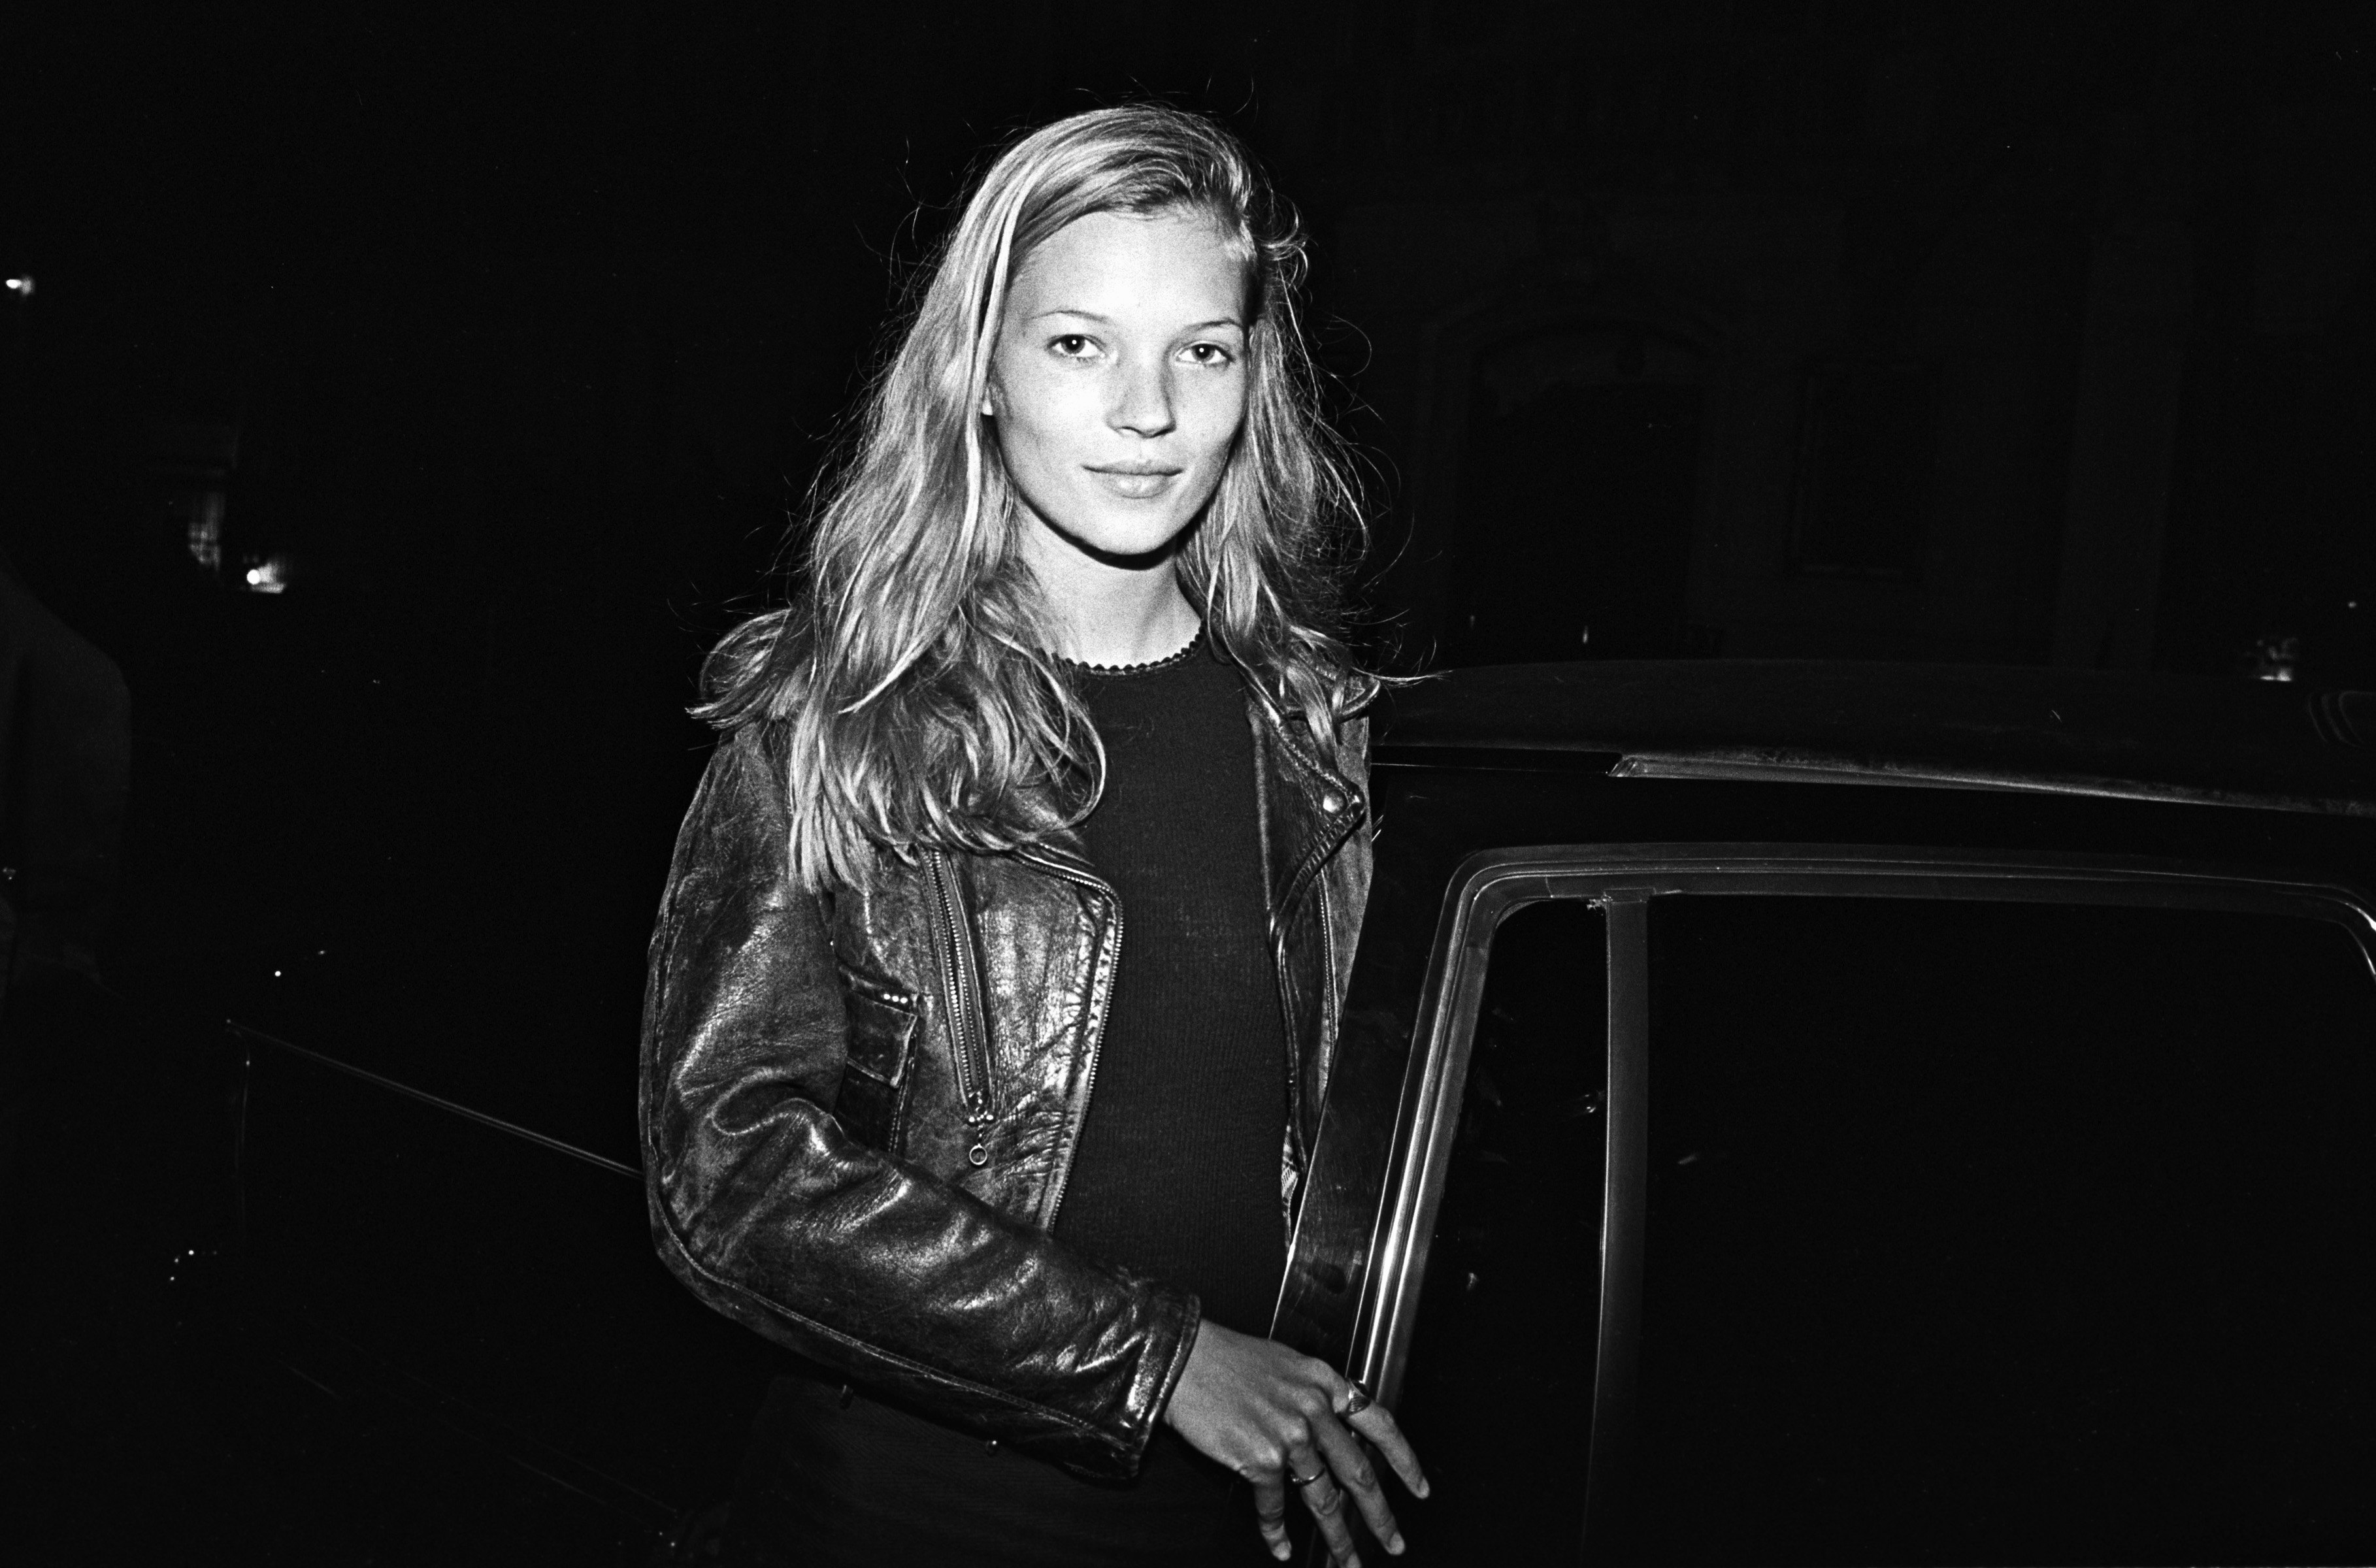 Naked Beach Models Pussys - America's Obsession: Our 1994 Kate Moss Interview